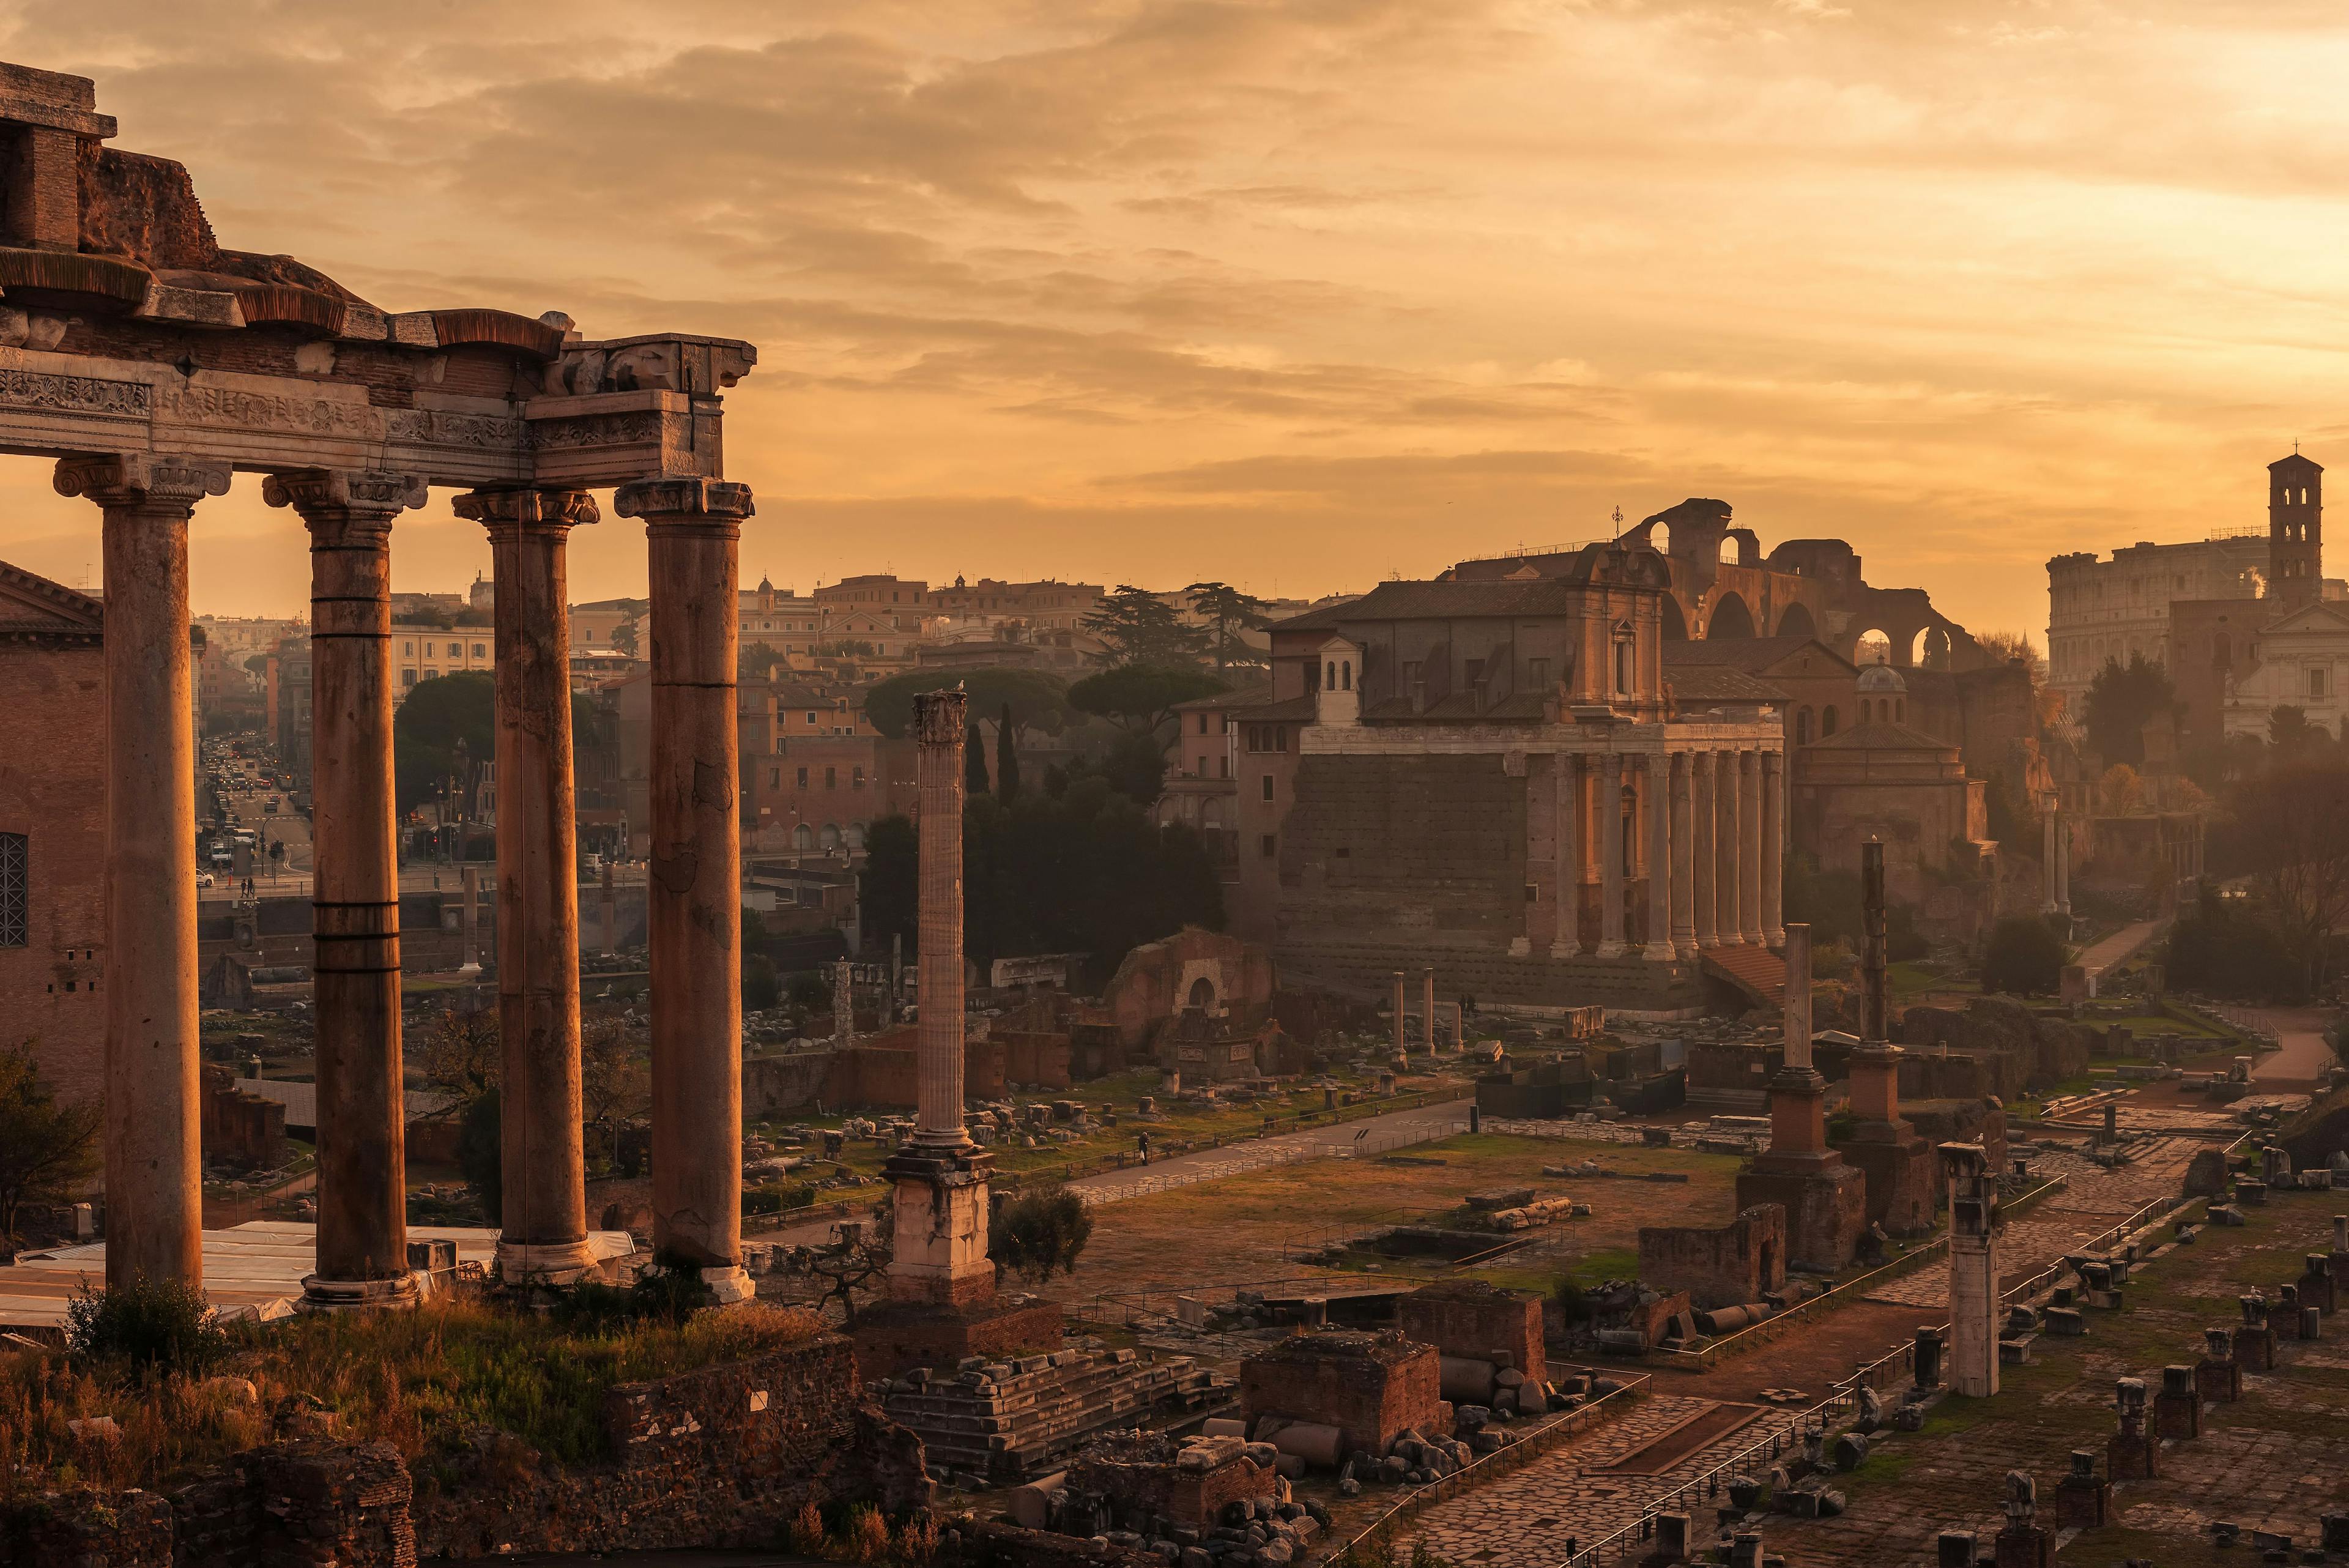 Rome, Italy: The Roman Forum. Old Town of the city | Image Credit: © krivinis - stock.adobe.com